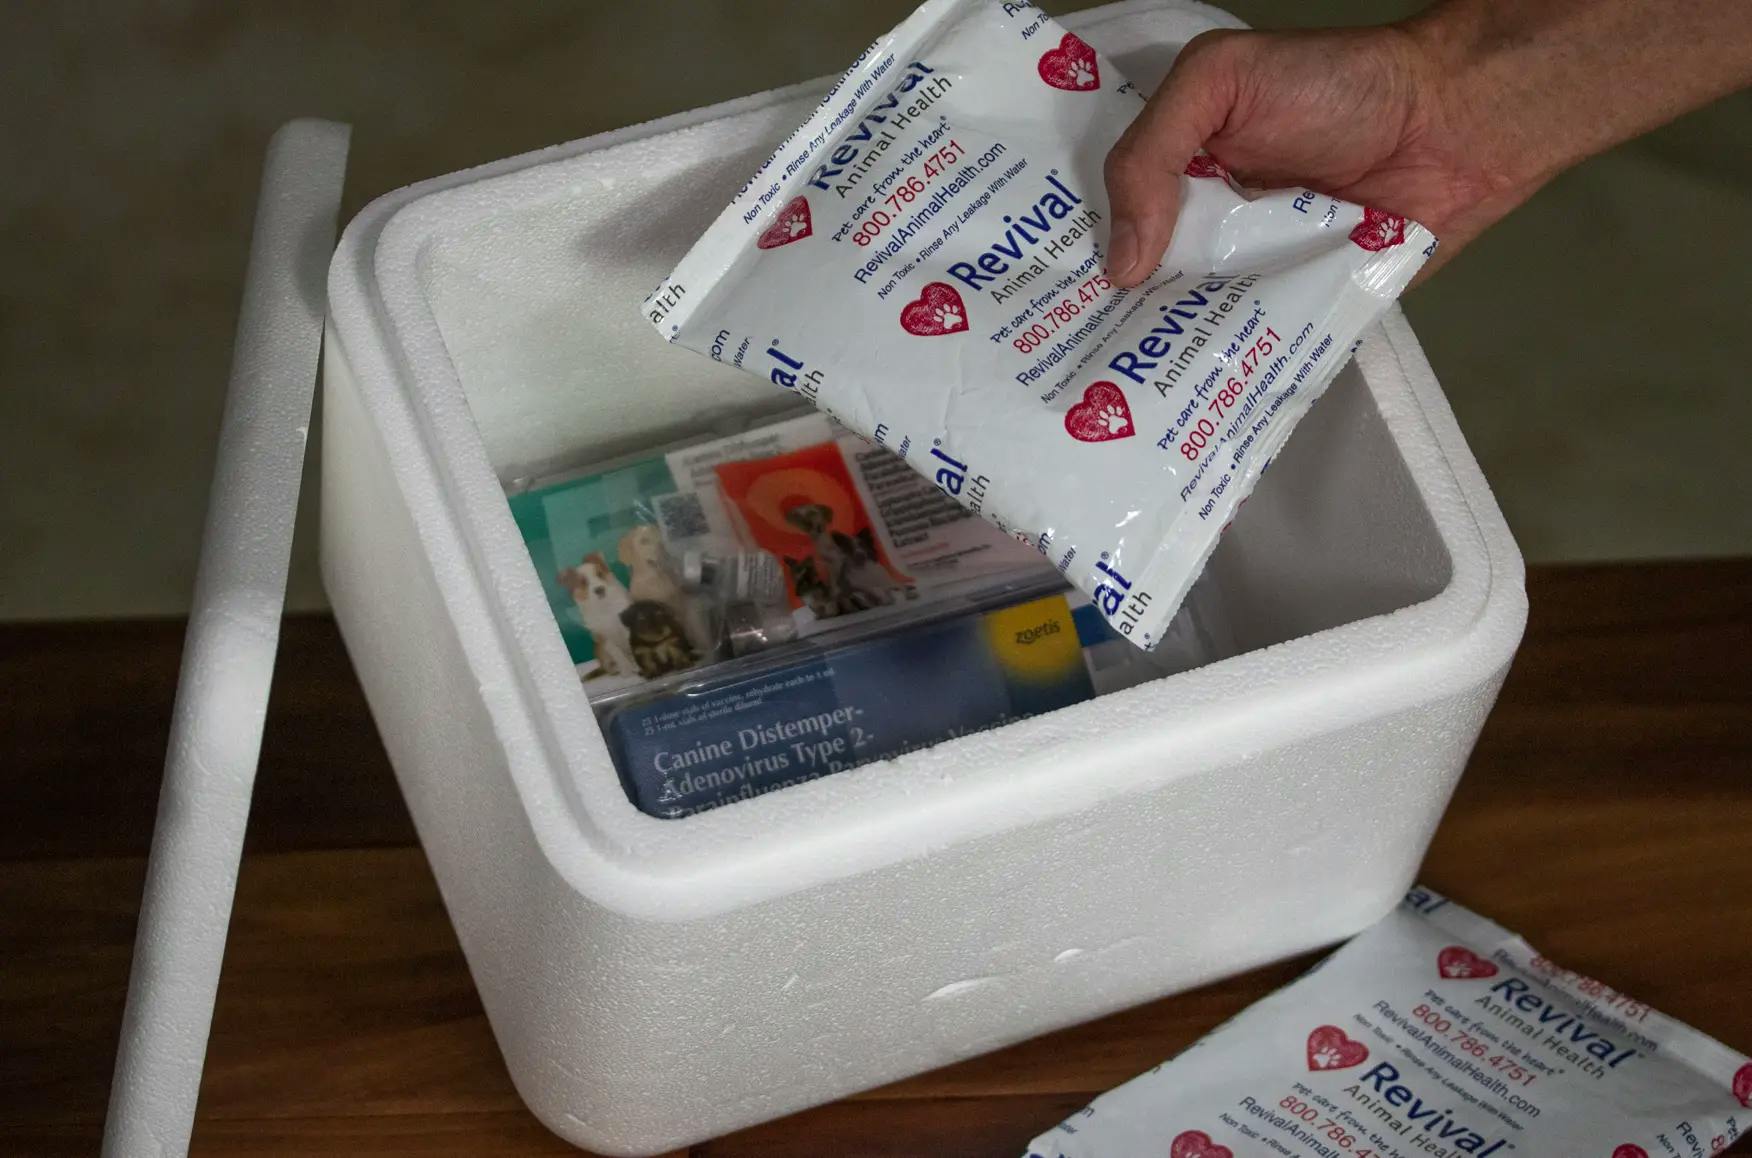 Revival antibacterial wipes taken out of styrofoam container